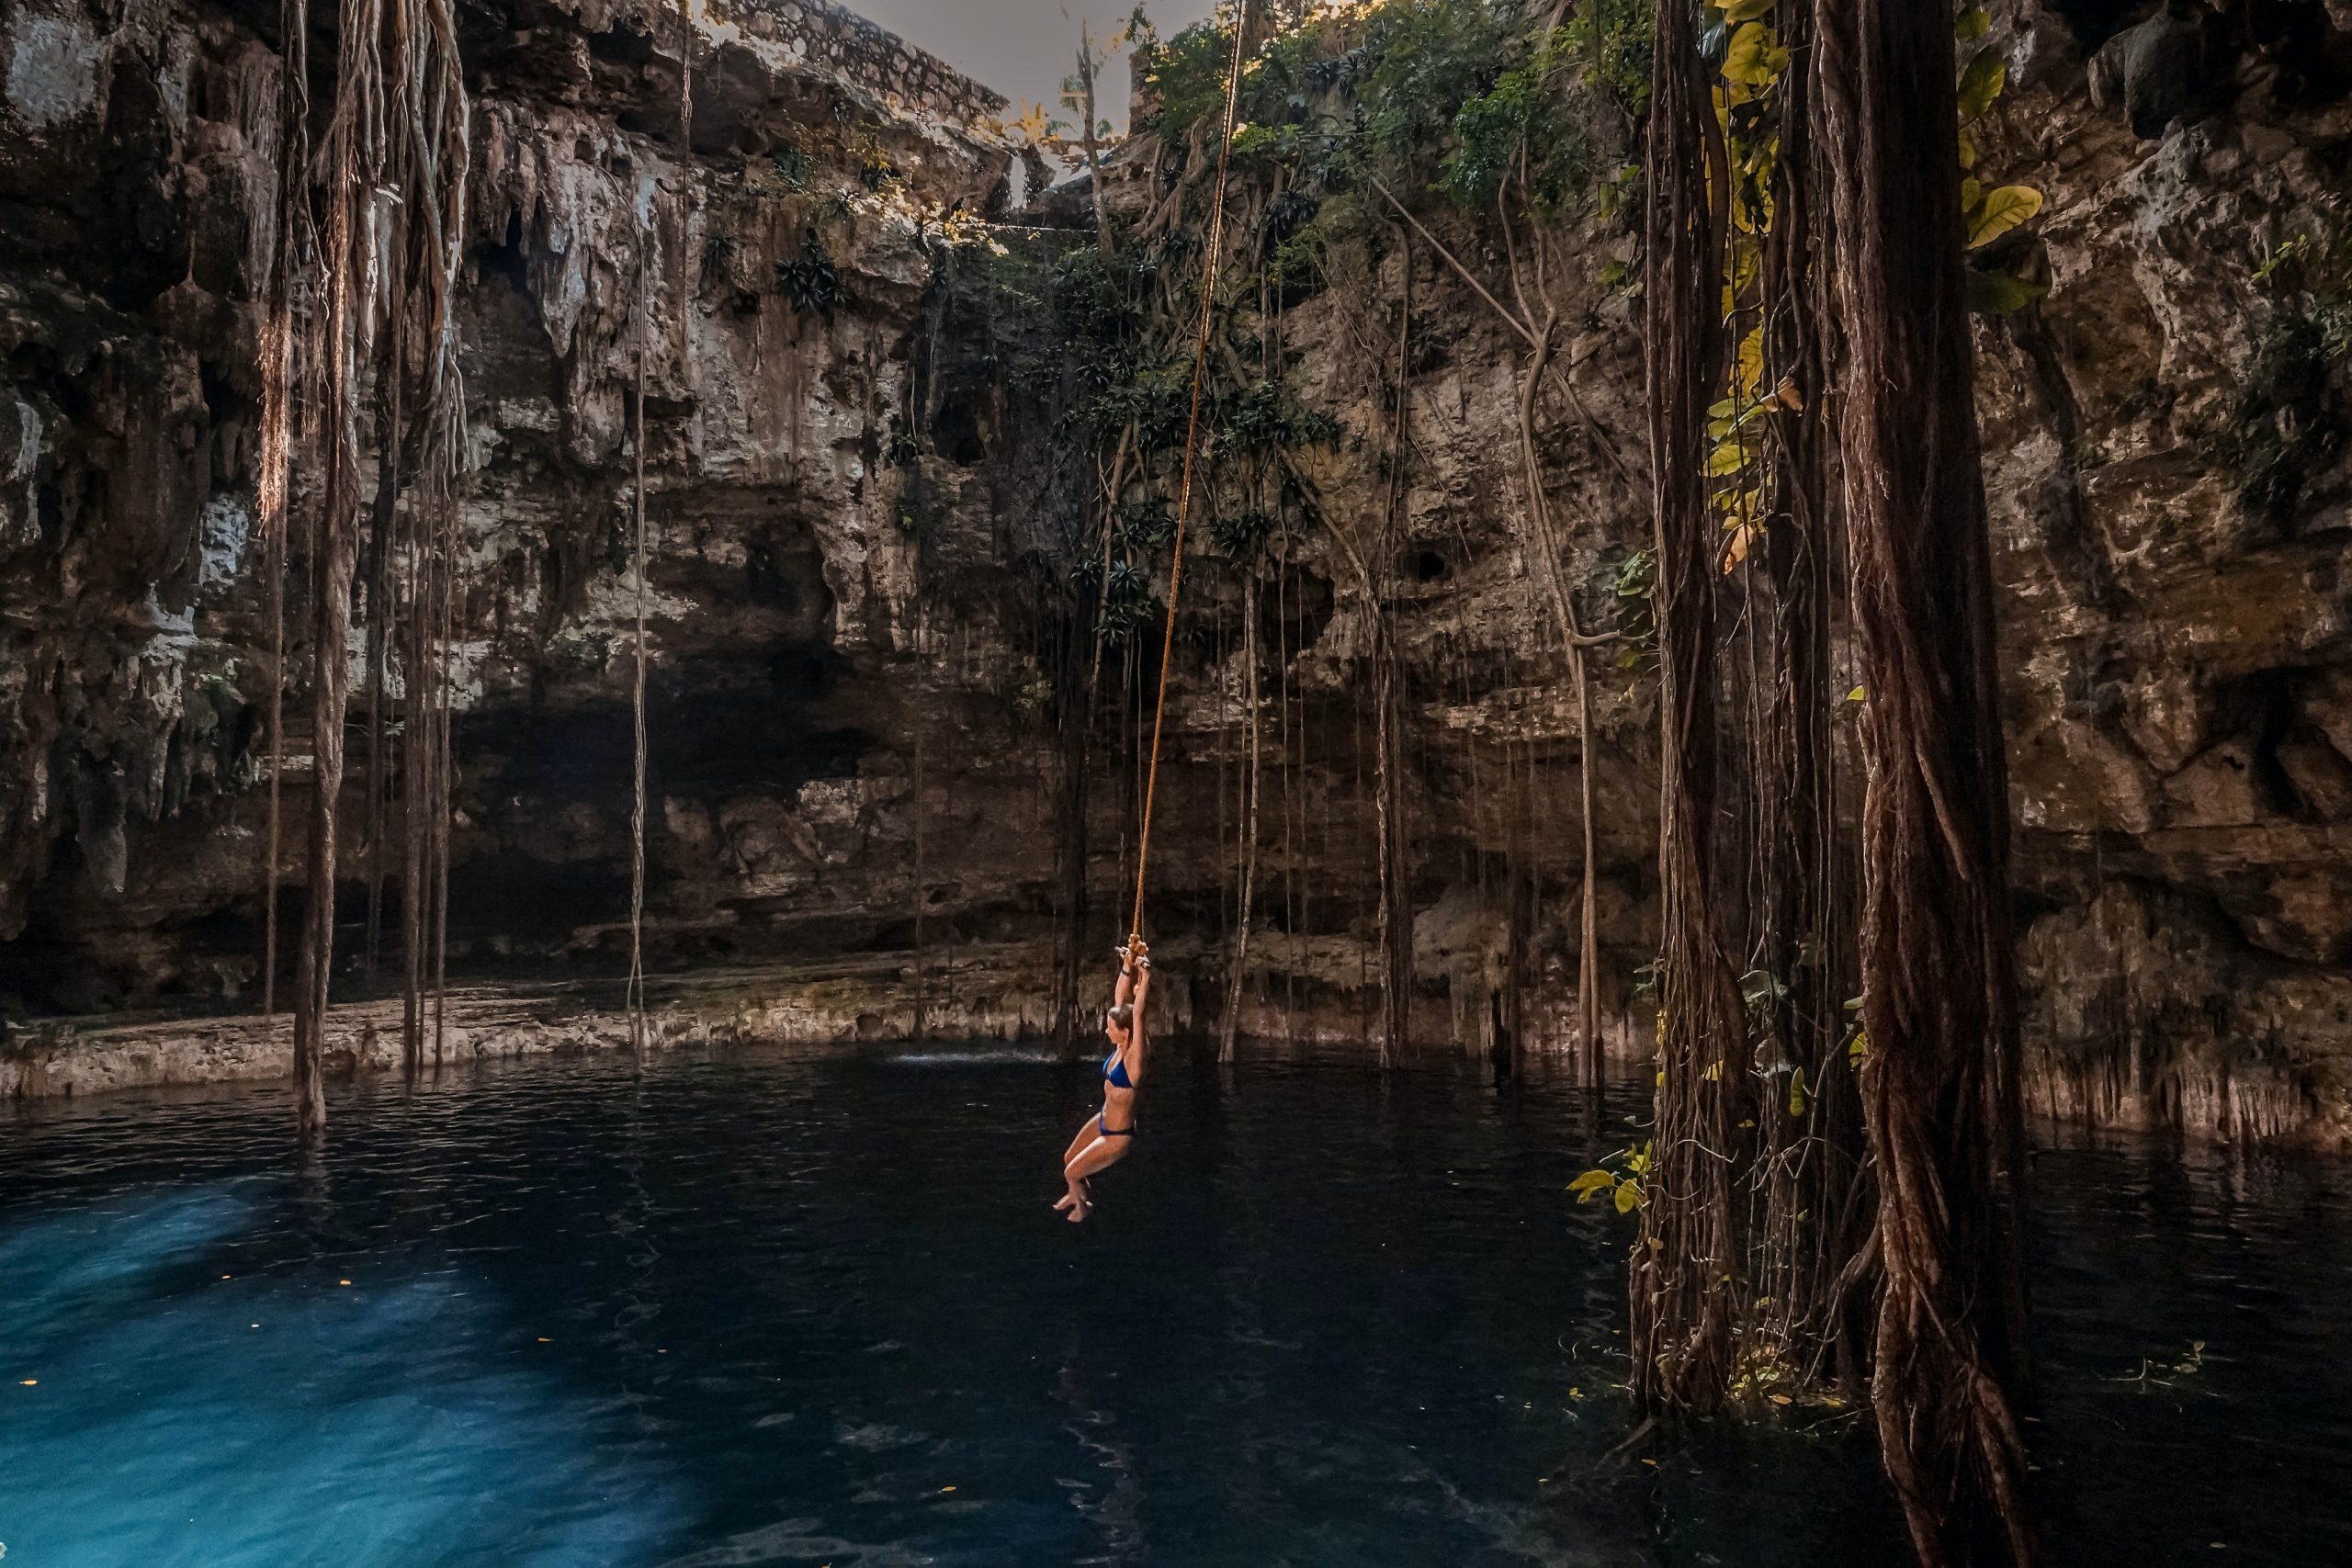 A person swings from a rope above a sunken lake or quarry. The clear pool of water is surrounded by rock walls and climbing roots and vines.